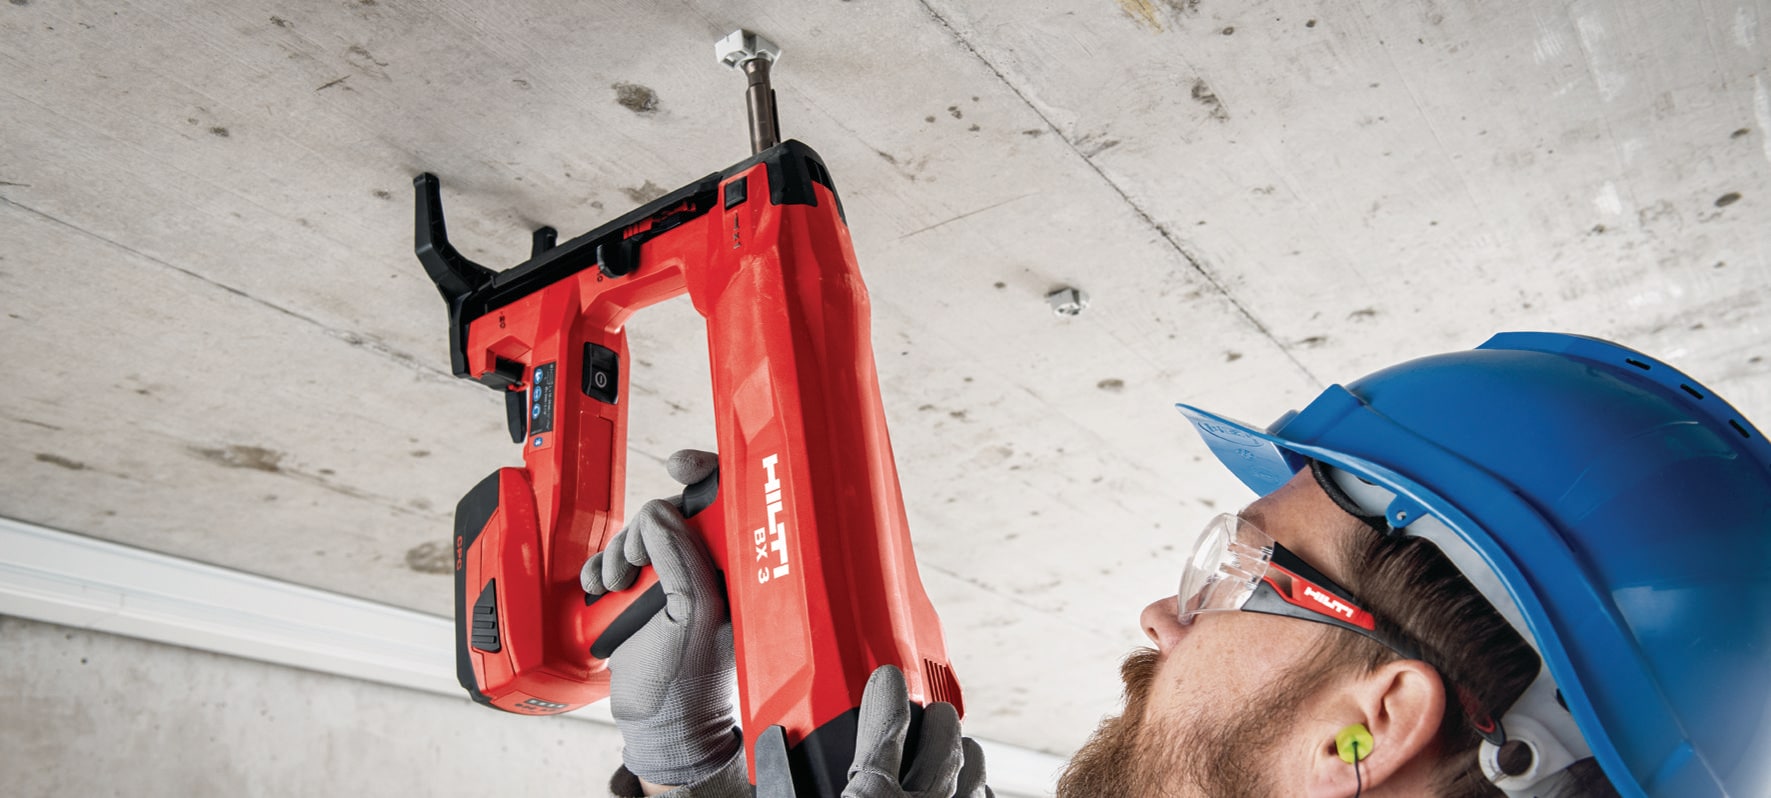 X-ECT MX Cable tie mount - Fastening elements - Hilti USA